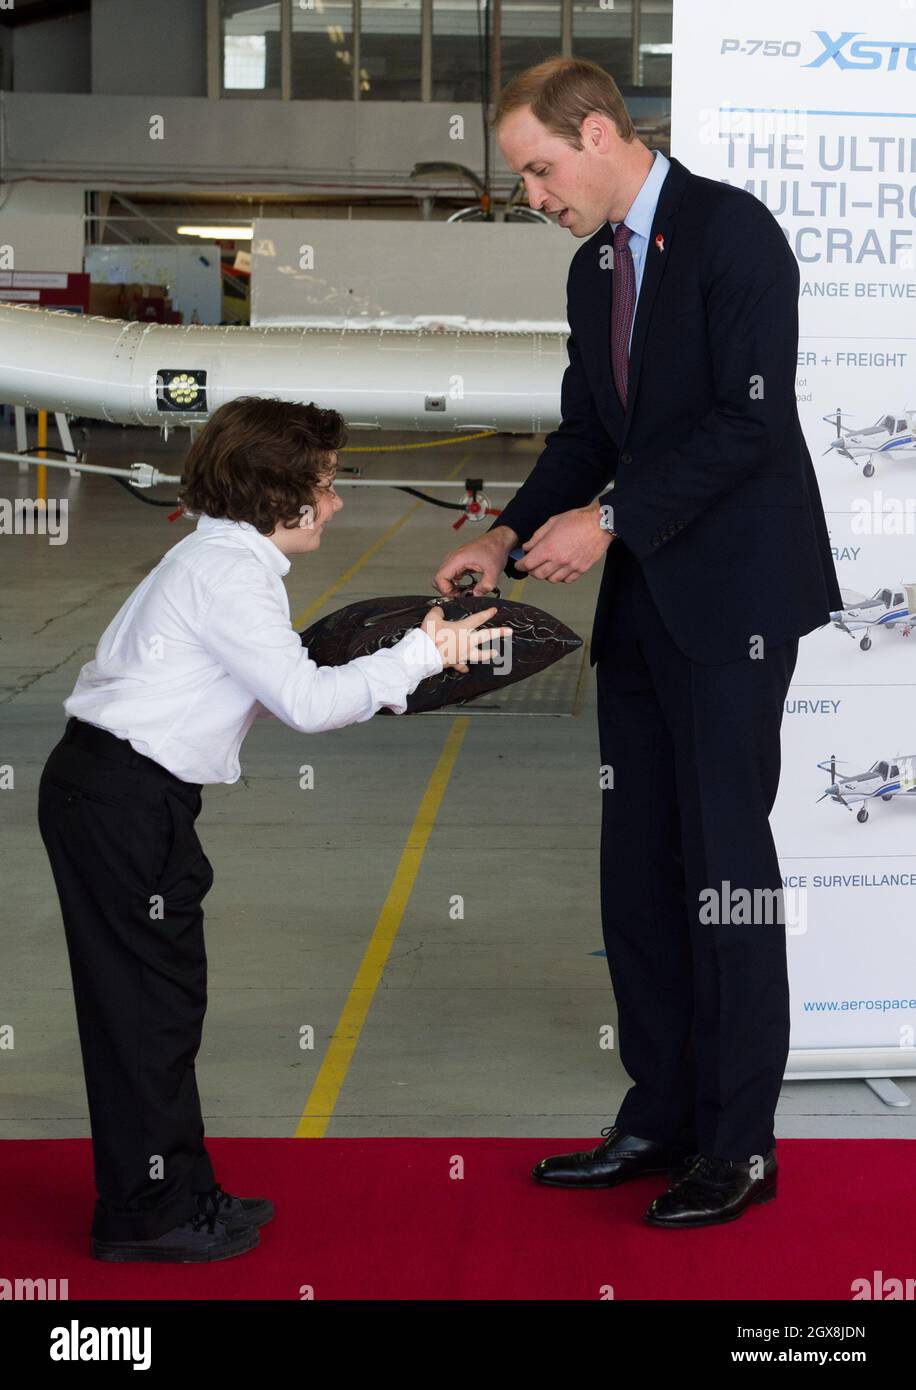 Prince William, Duke of Cambridge receives a gift from a boy during a visit to Pacific Aerospace in Hamilton, New Zealand Stock Photo